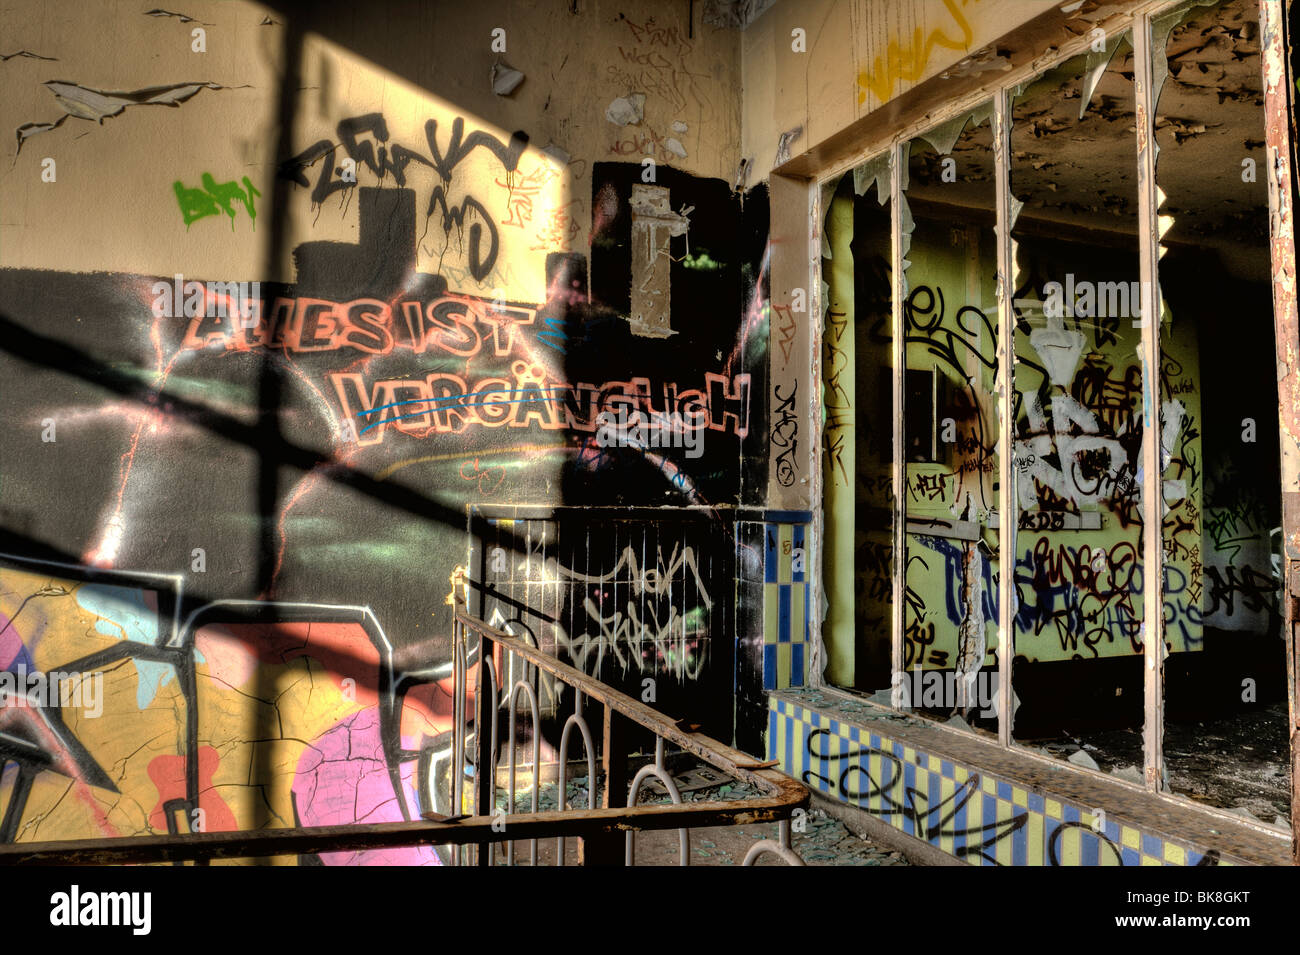 Room in an old ruin, Berlin, Germany Stock Photo